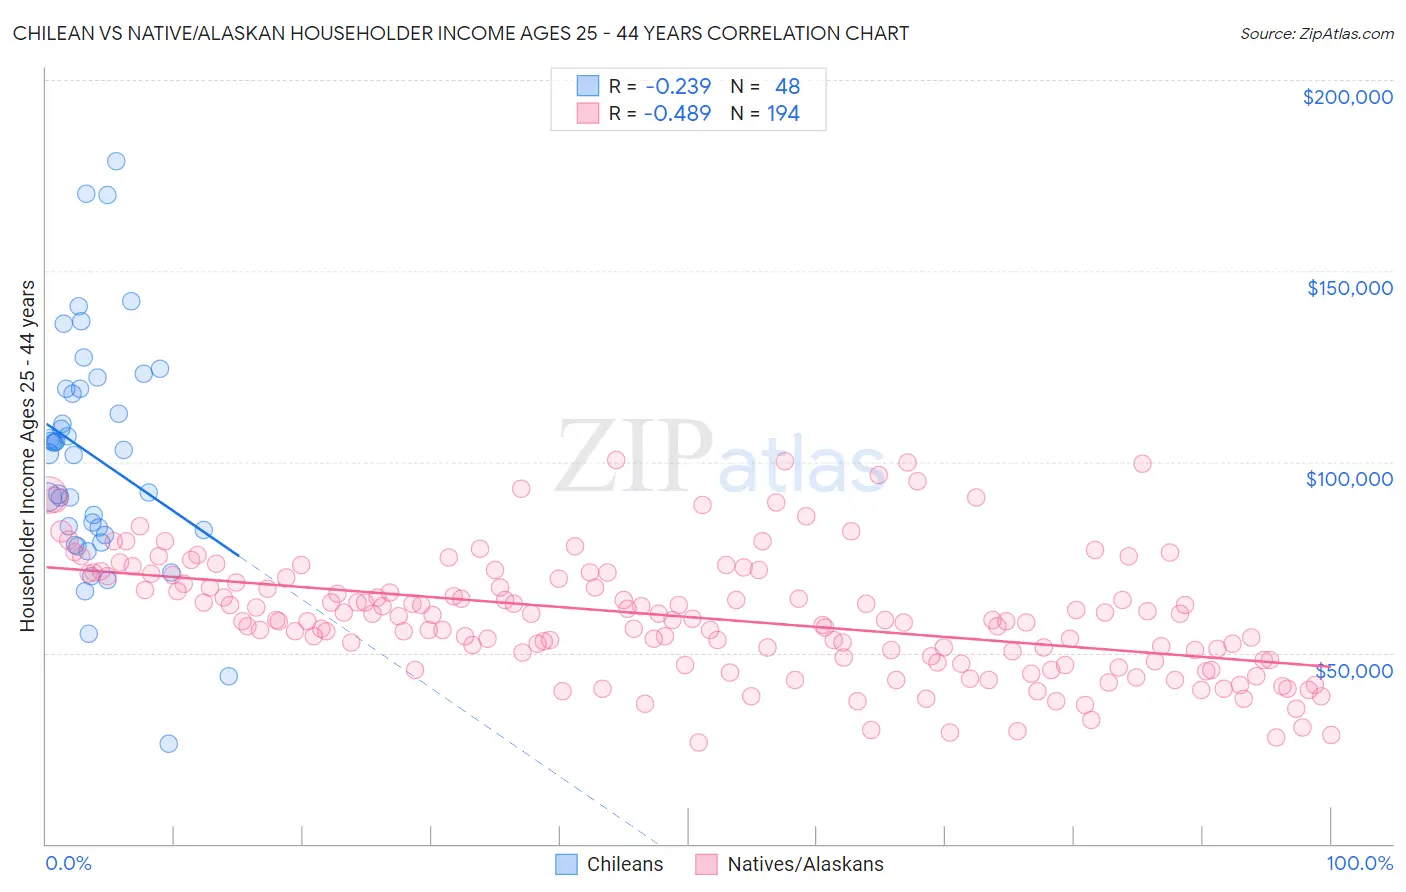 Chilean vs Native/Alaskan Householder Income Ages 25 - 44 years